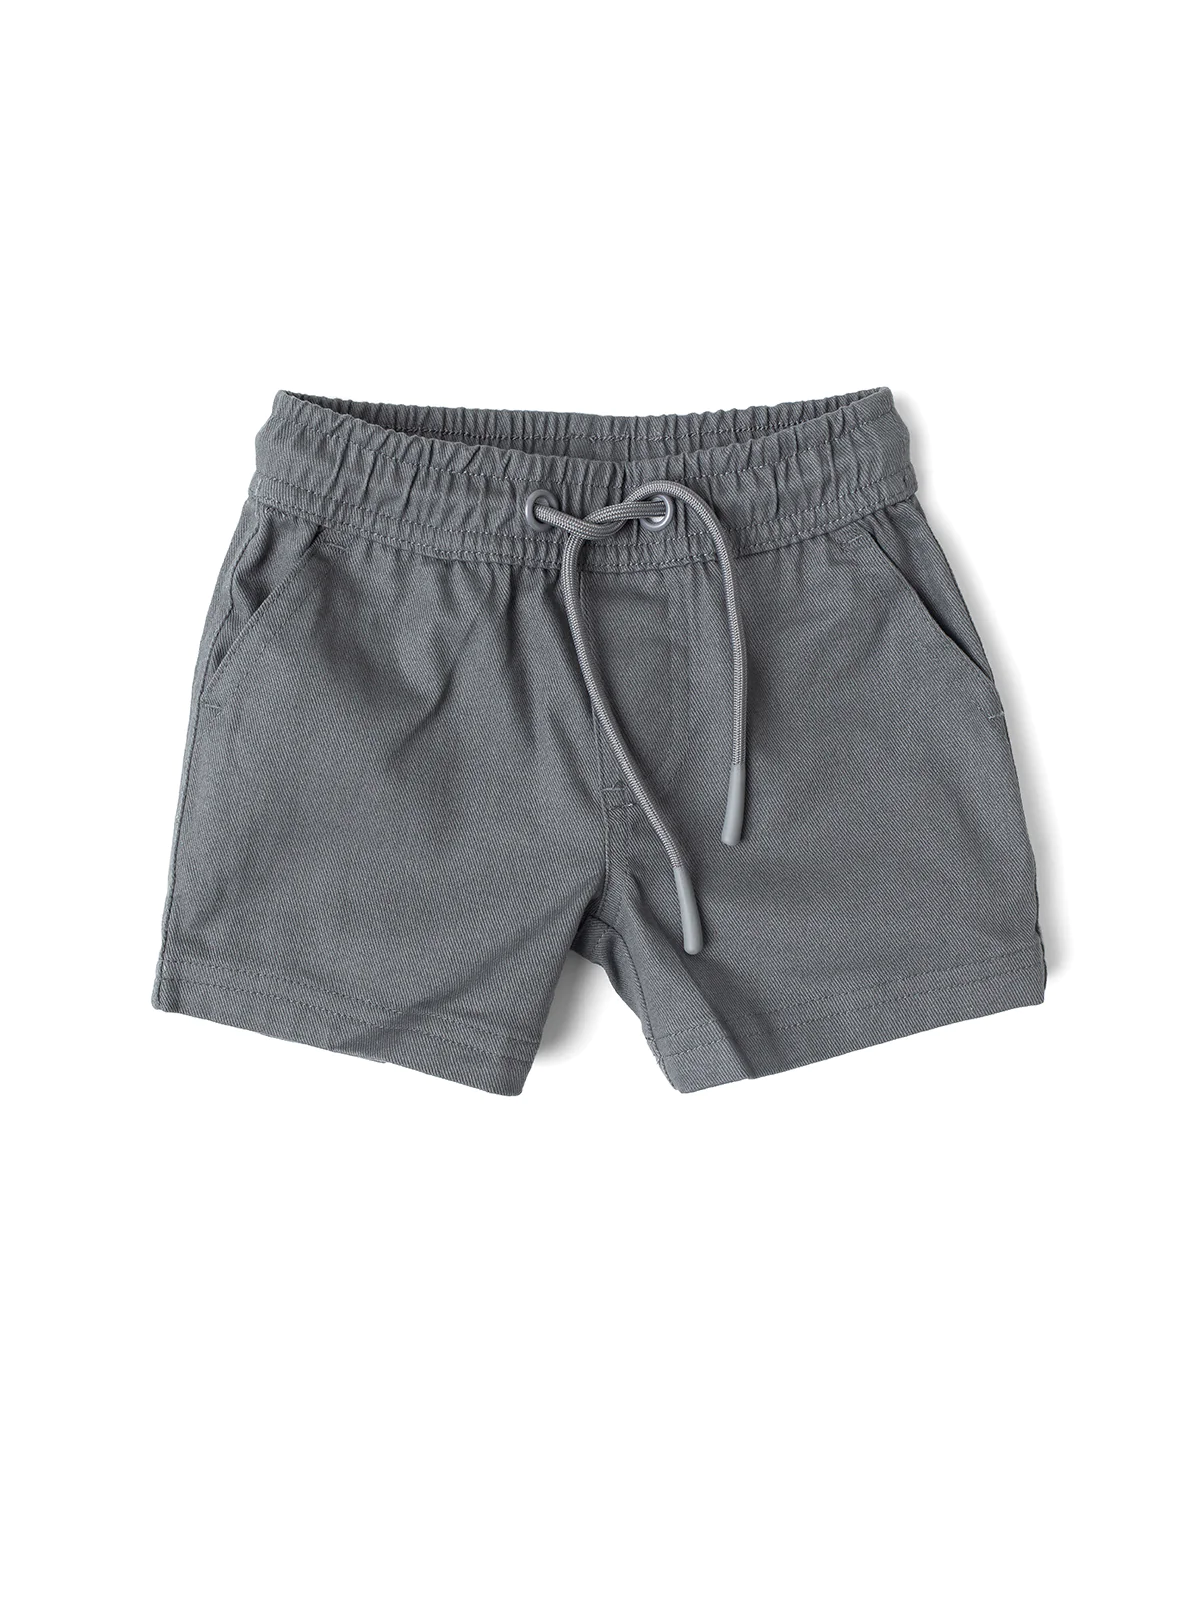 Little Bipsy Cotton Twill Short- Charcoal